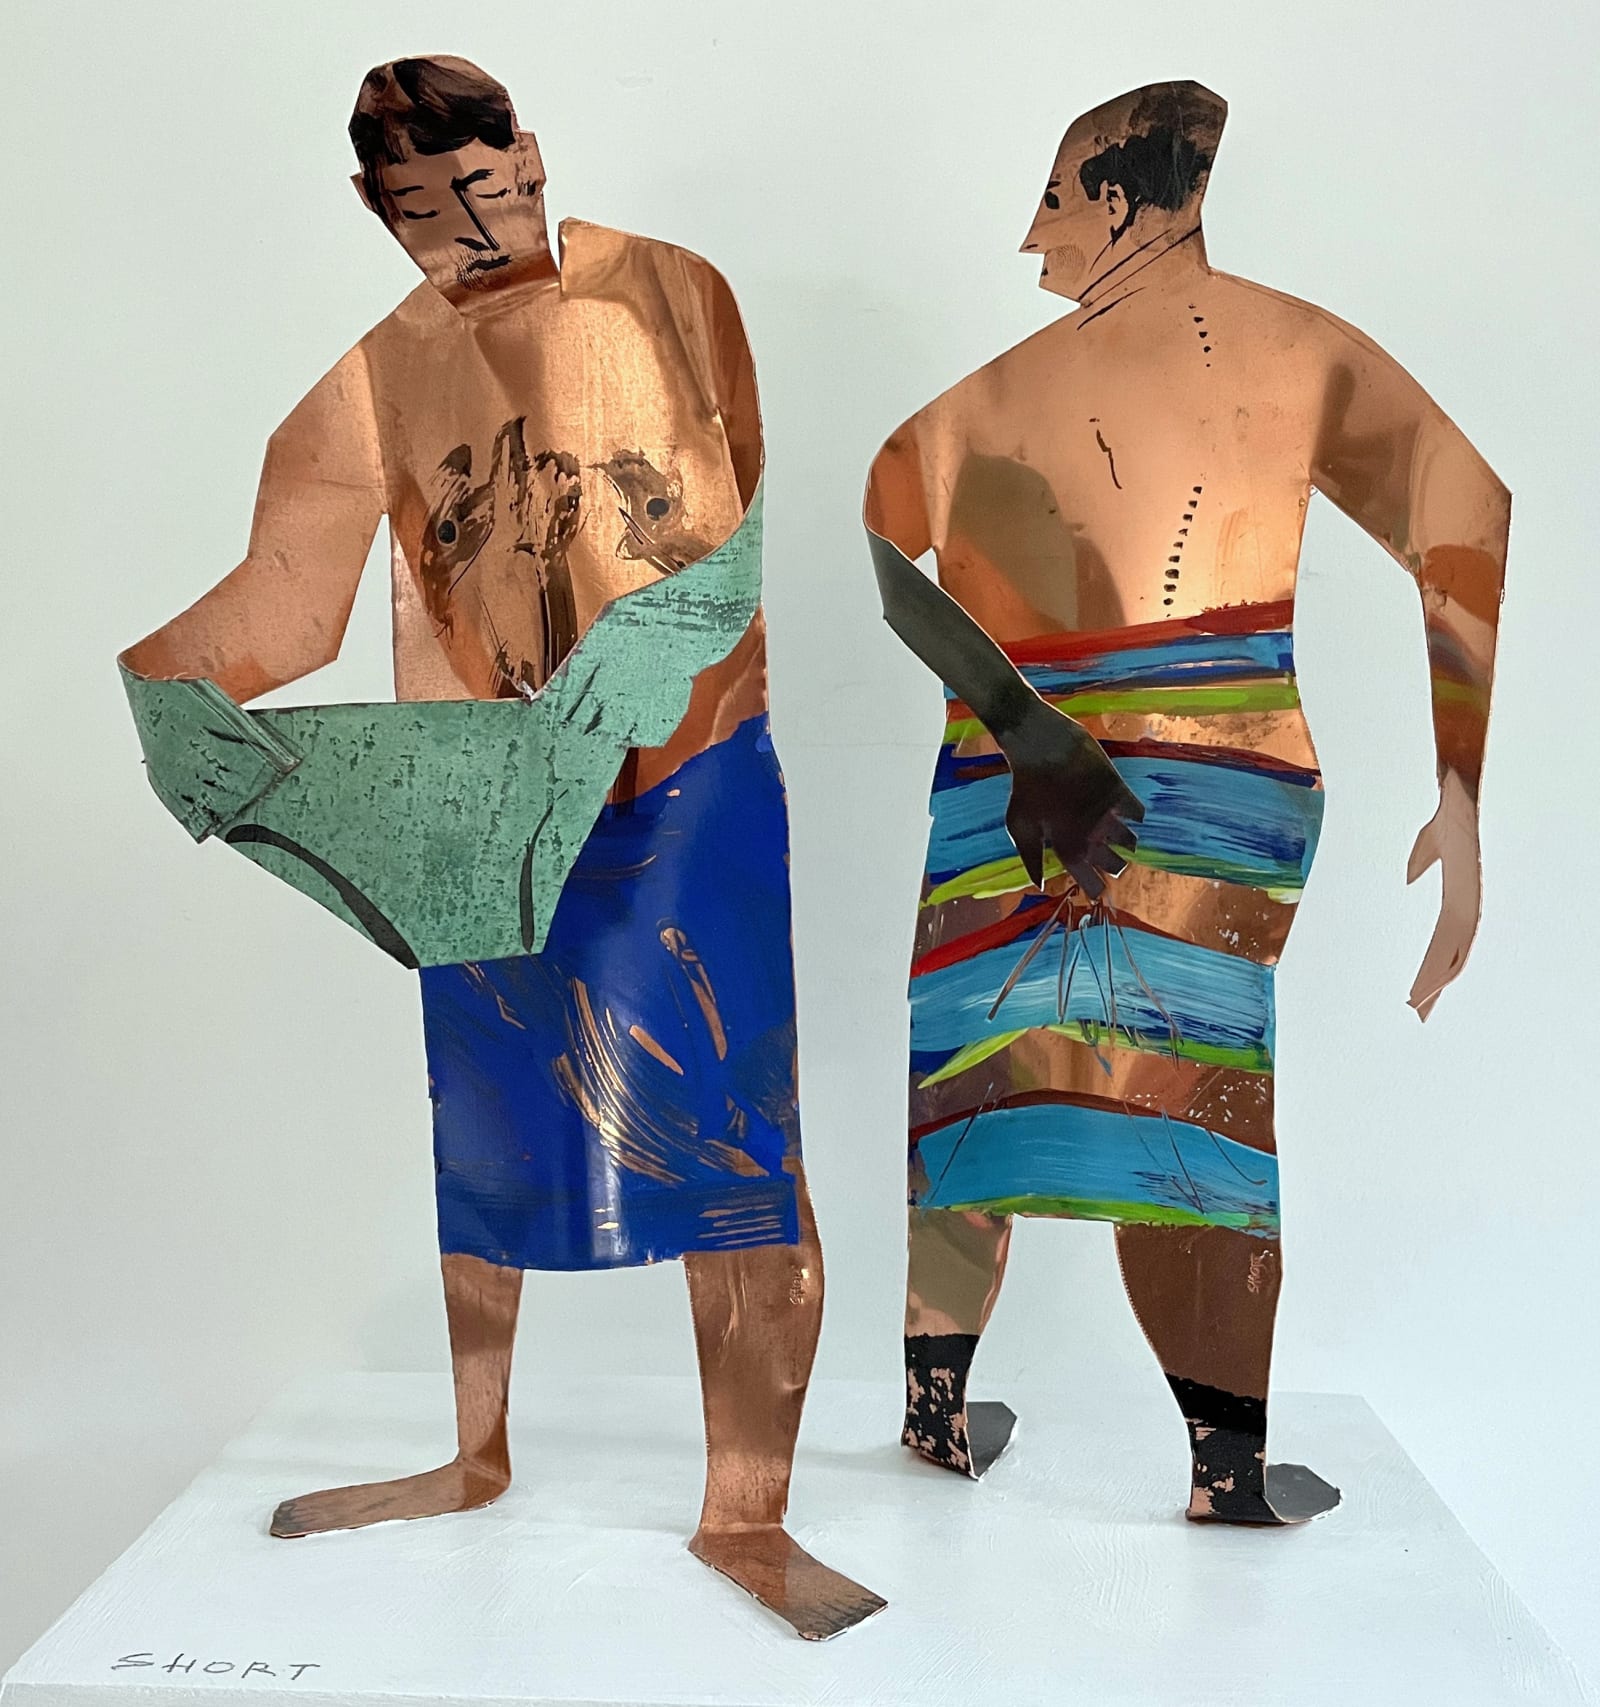 John Short: Two Bathers, Male, copper and steel | John Short: New Works in 2D and 3D | Thursday 9 March – Saturday 1 April 2023 | Solomon Fine Art